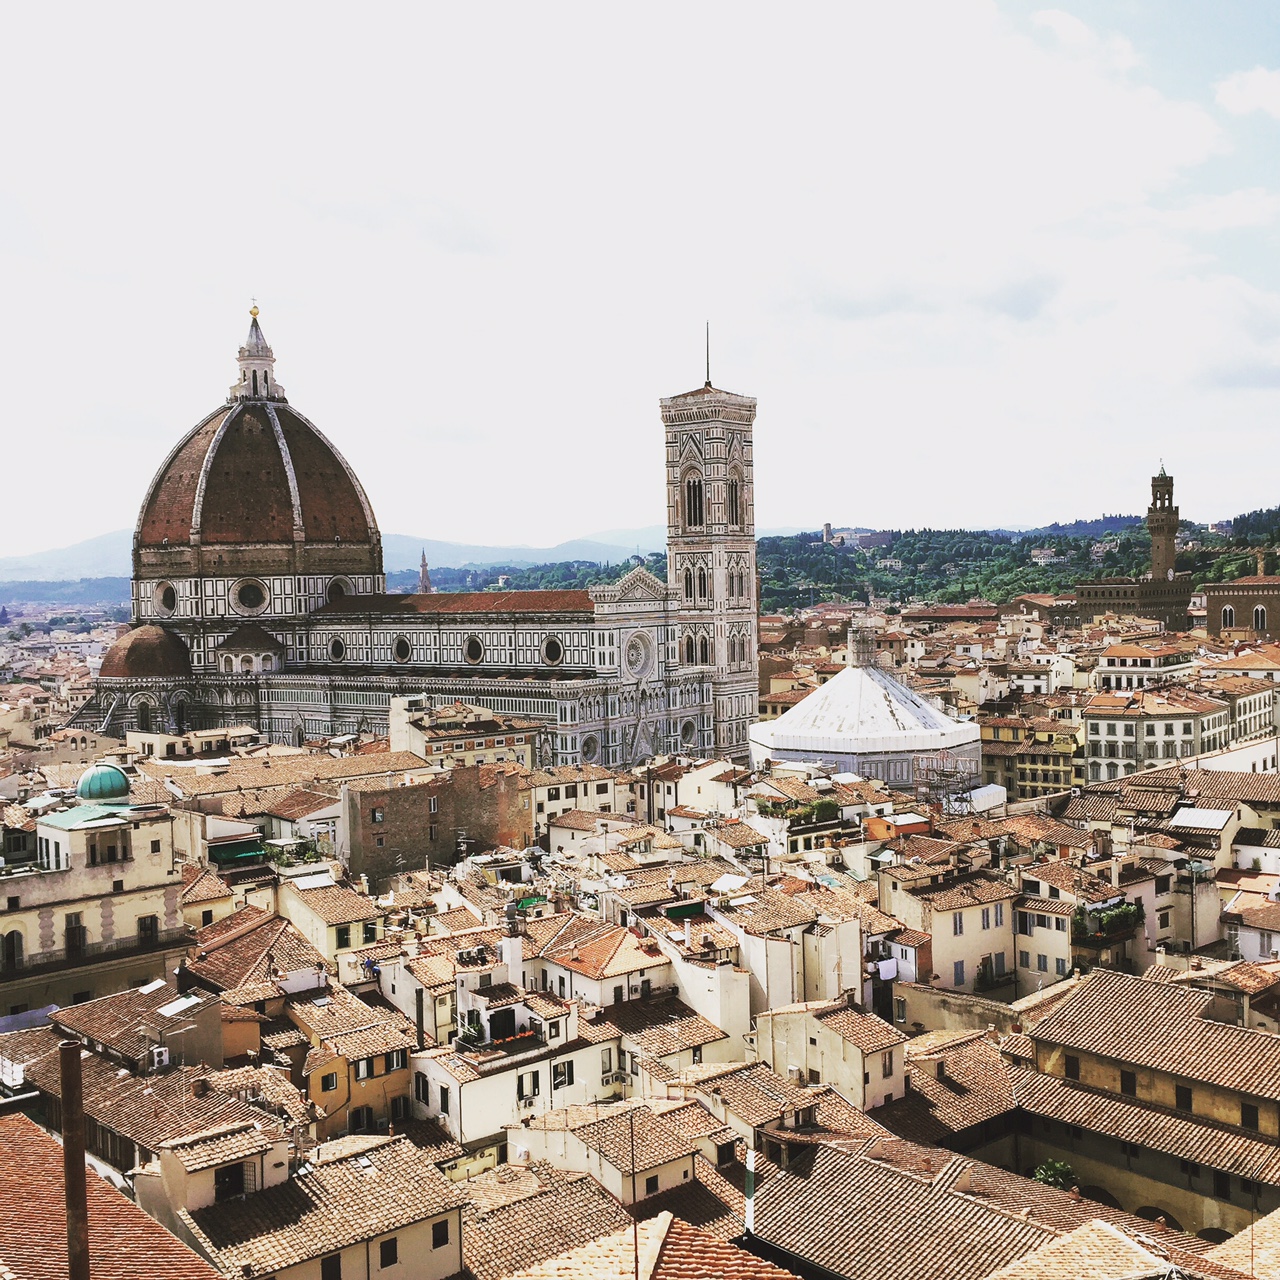 View from the top of the San Lorenzo bell tower & Ph. ©2015 Helen Farrell / The Florentine